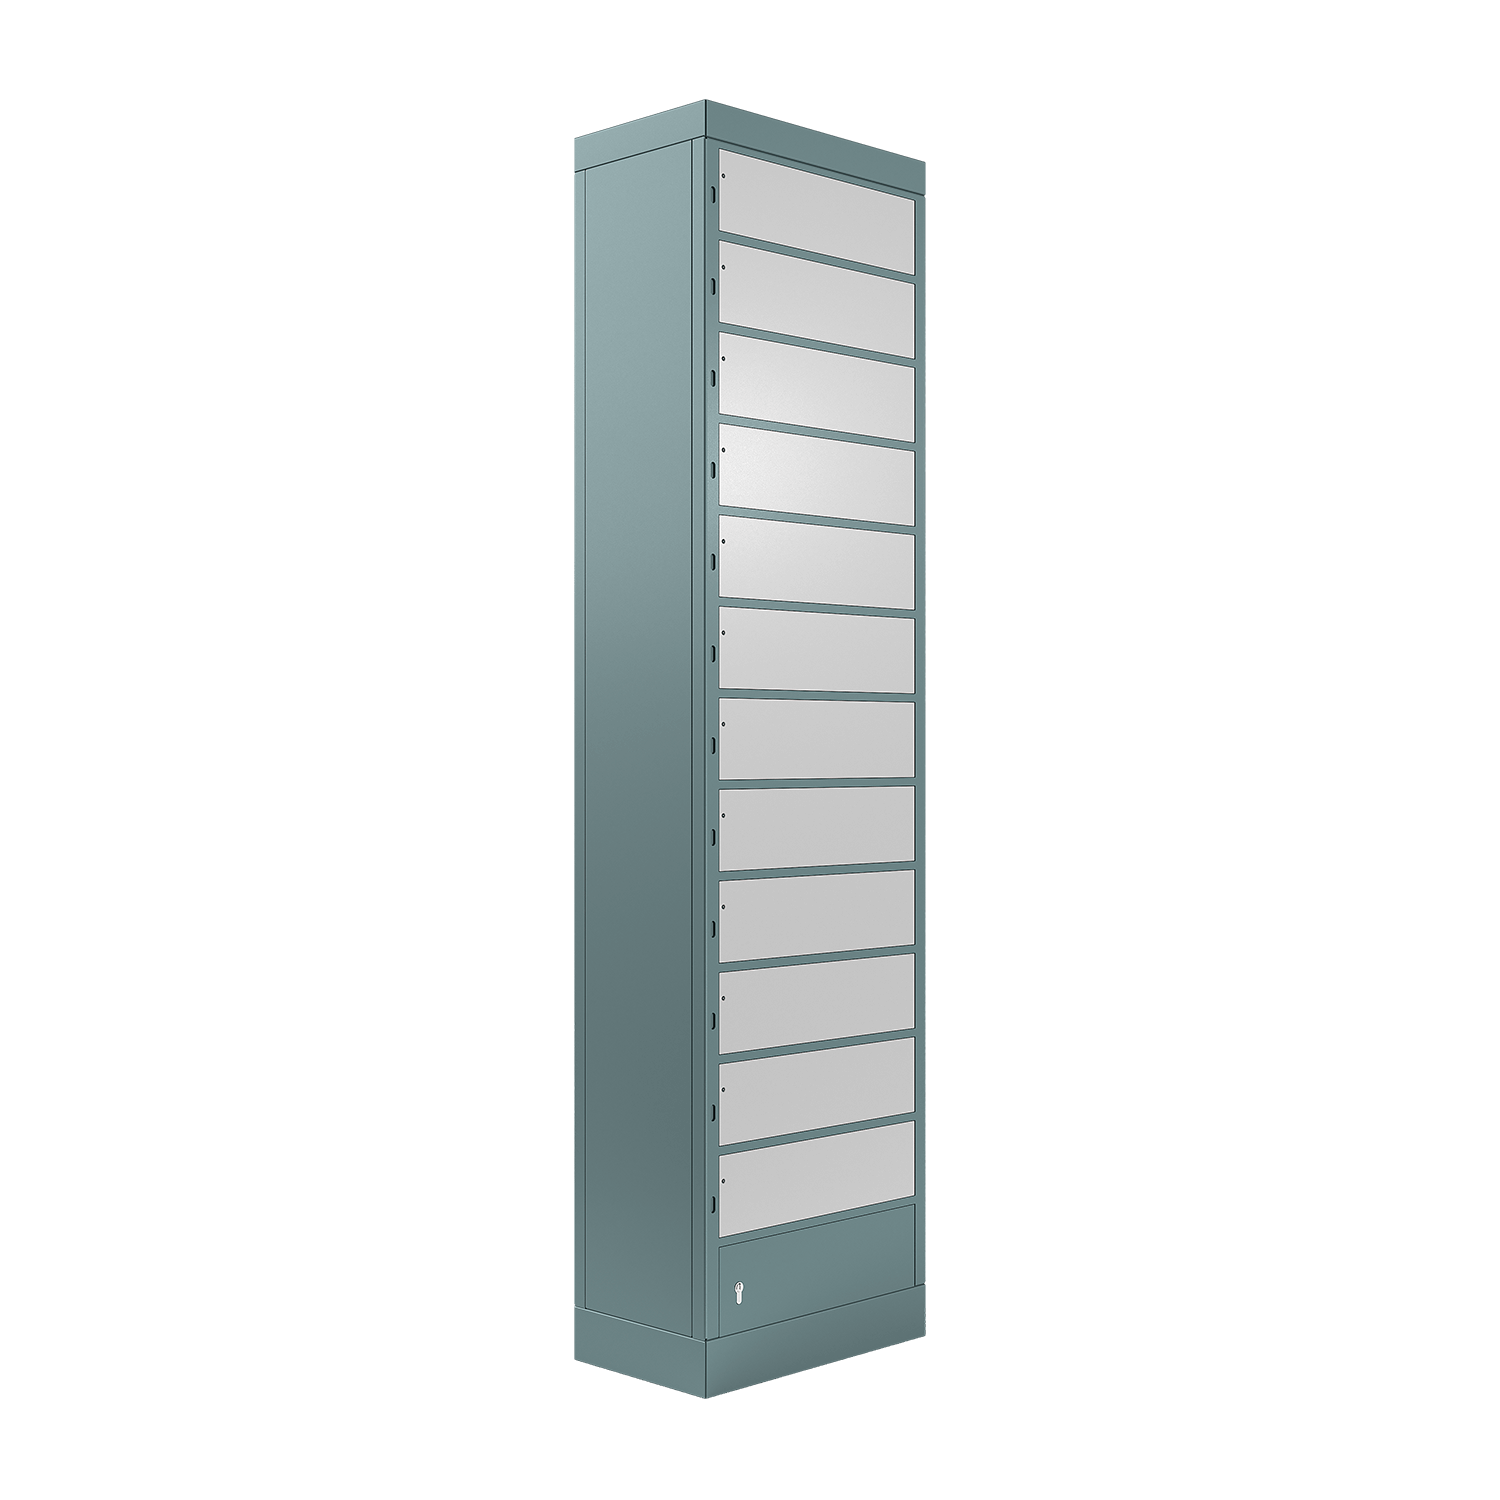 locker compartment system, size M, with 12 compartments for safekeeping, left view